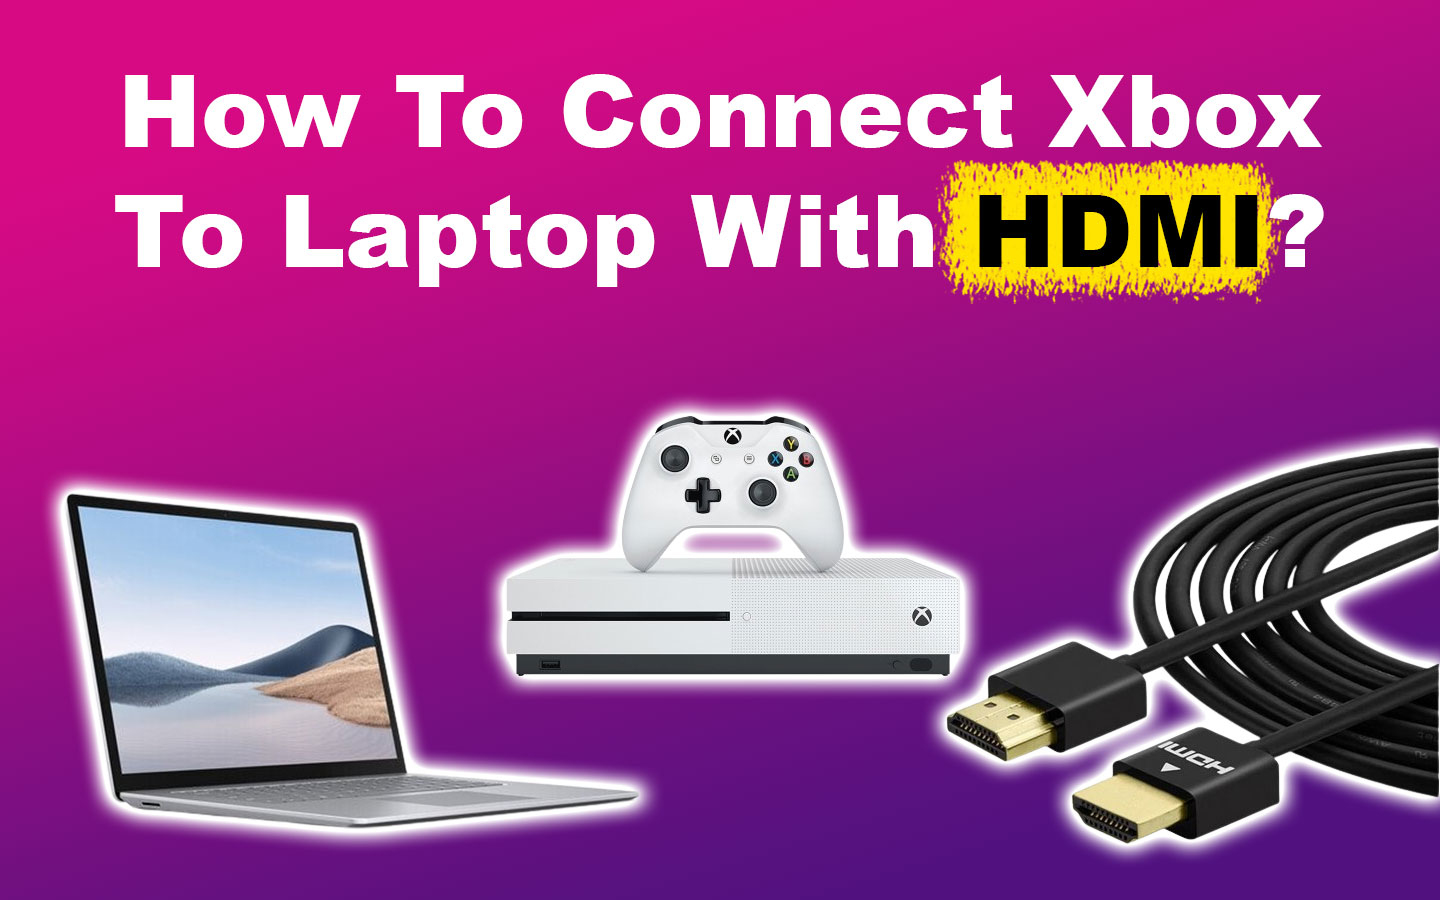 How To Connect Xbox To Laptop With HDMI